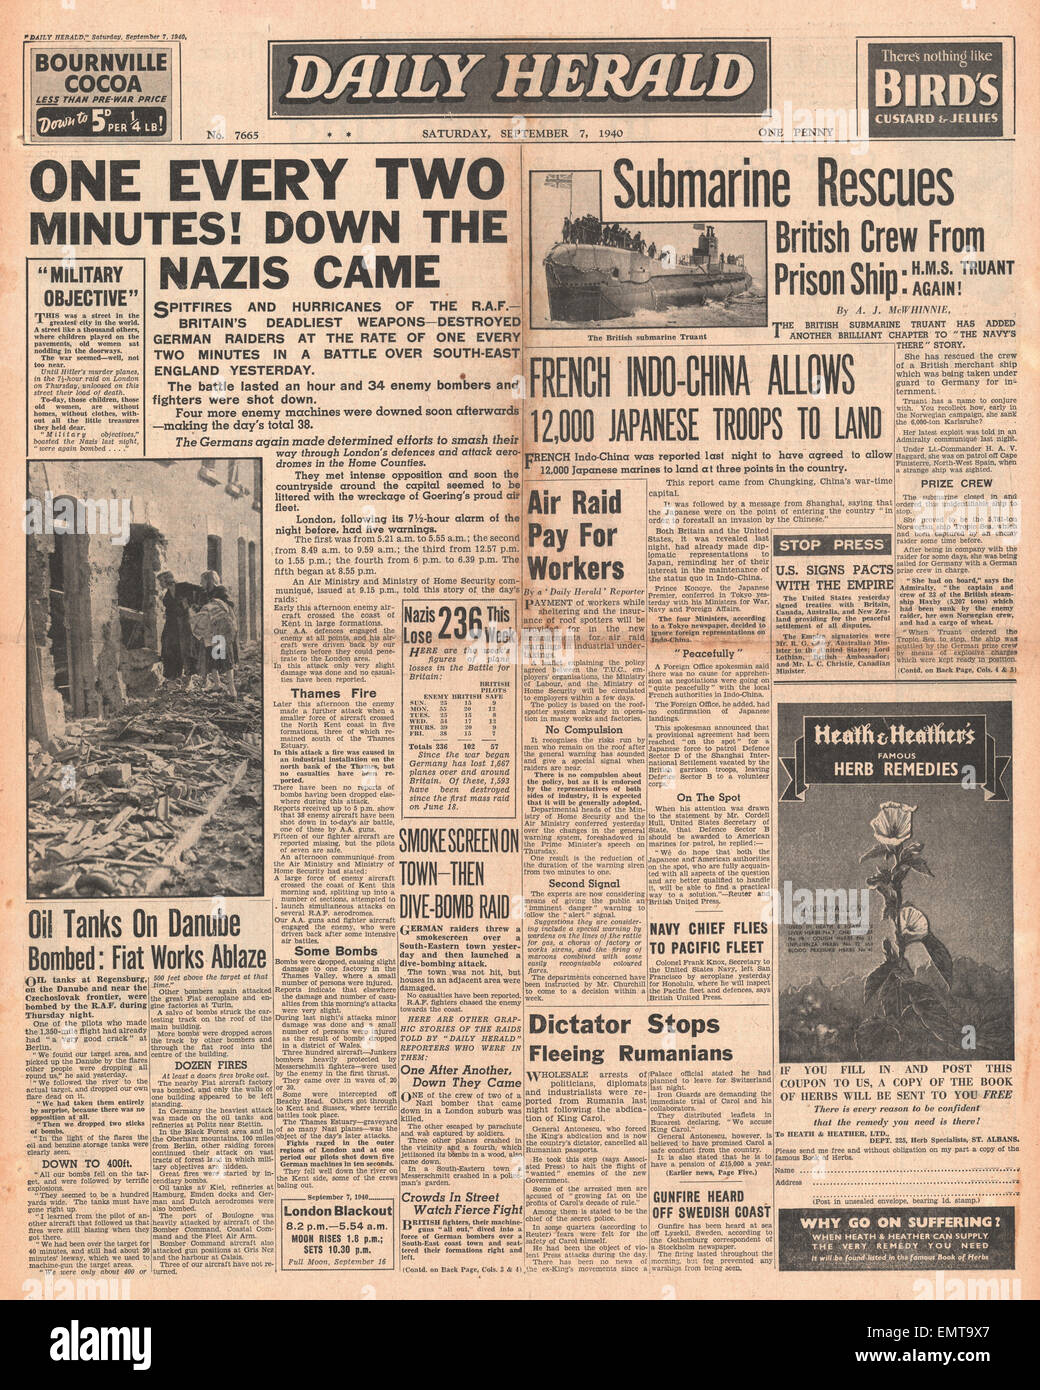 1940 front page Daily Herald RAF Luftwaffe Battle over South East England Submarine HMS Truant rescues Merchant Seamen Stock Photo